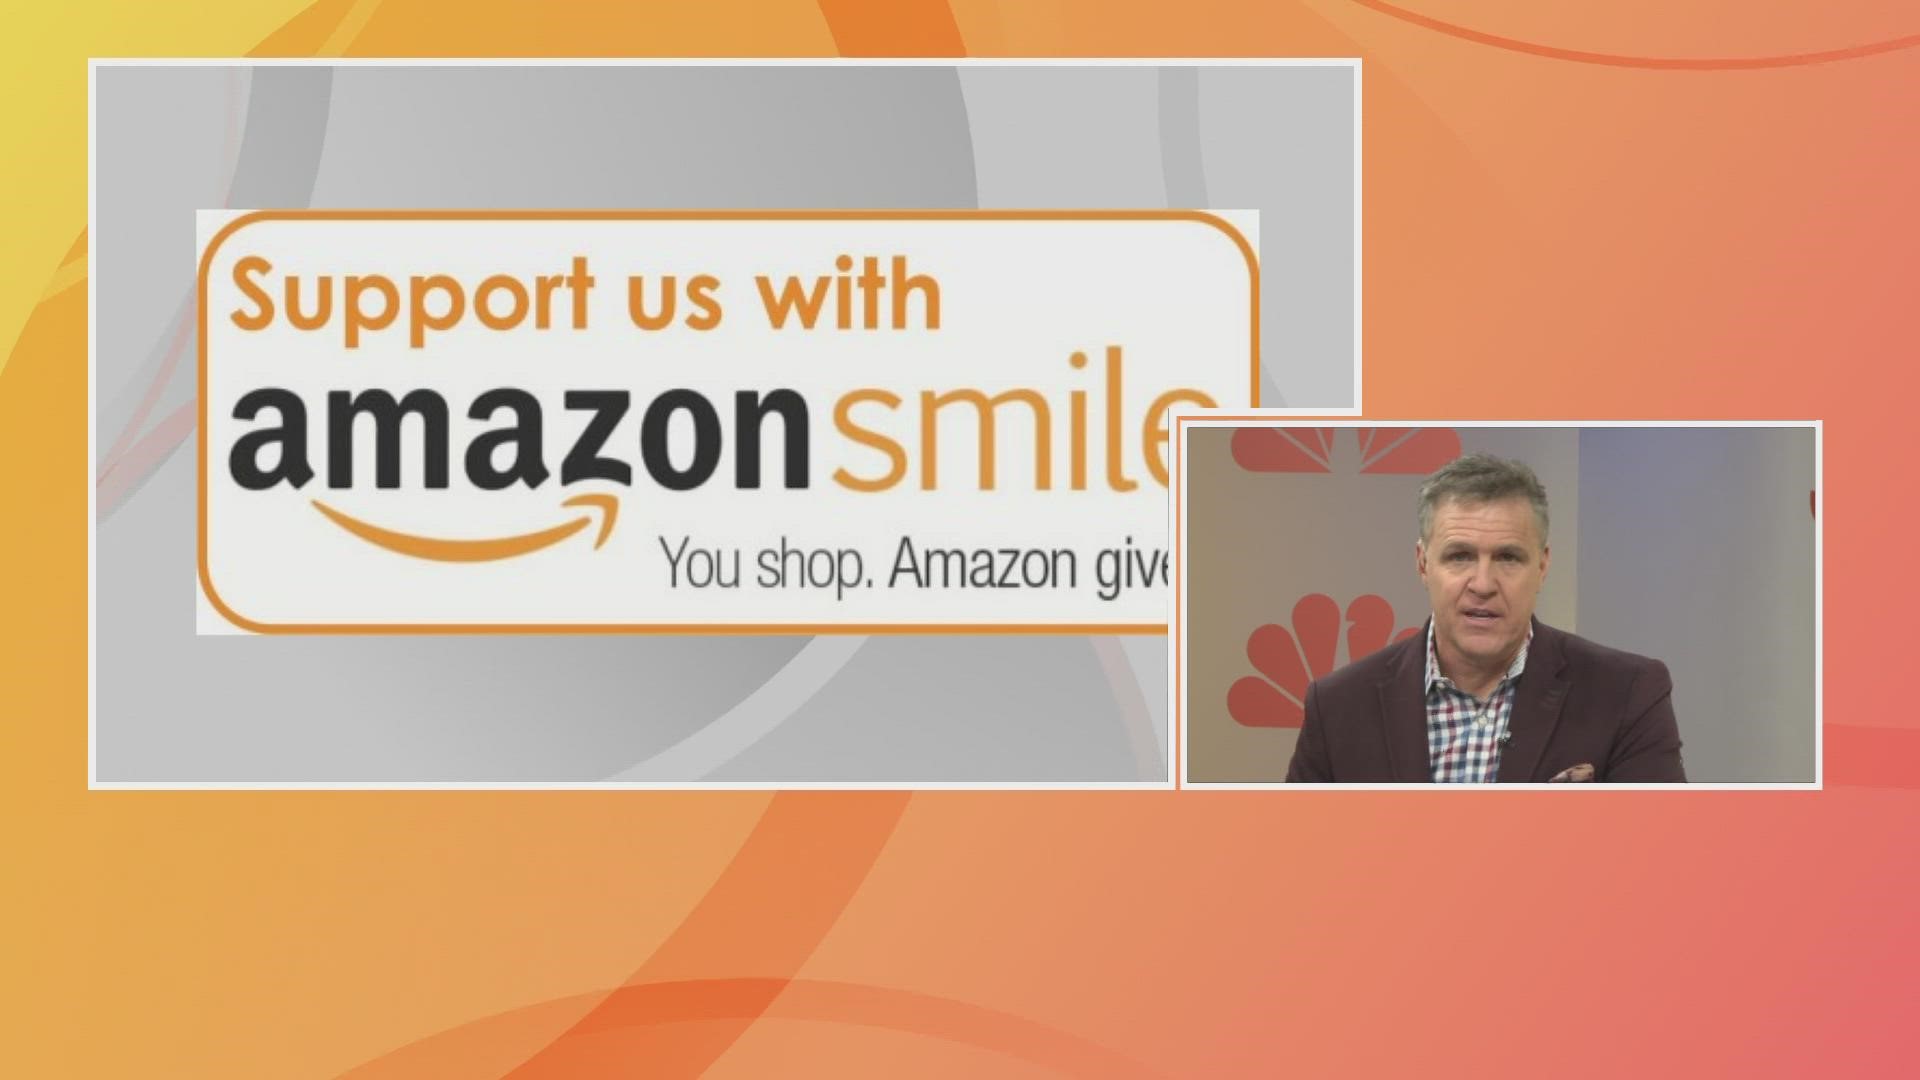 The program allowed customers to have a small percentage of purchases donated to a charity of their choosing. It will end by Feb. 20, Amazon said.